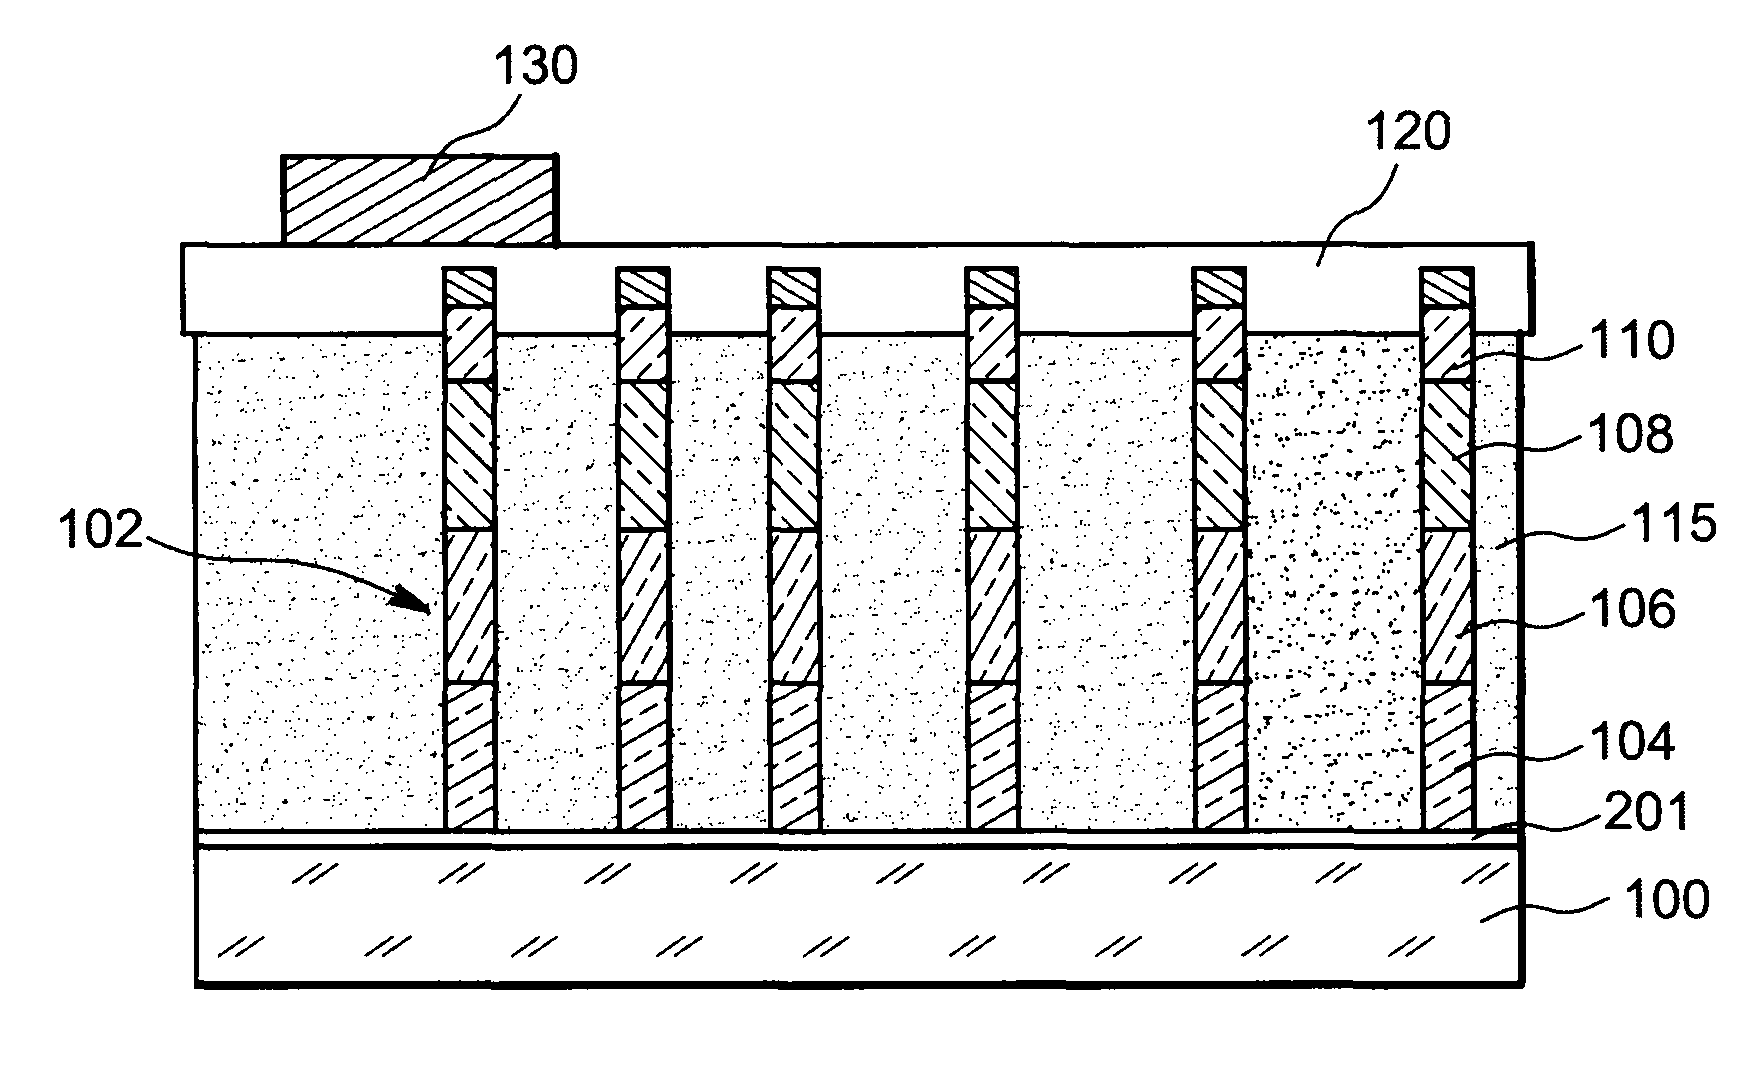 Method for making a light-emitting microelectronic device with semi-conducting nanowires formed on a metal substrate